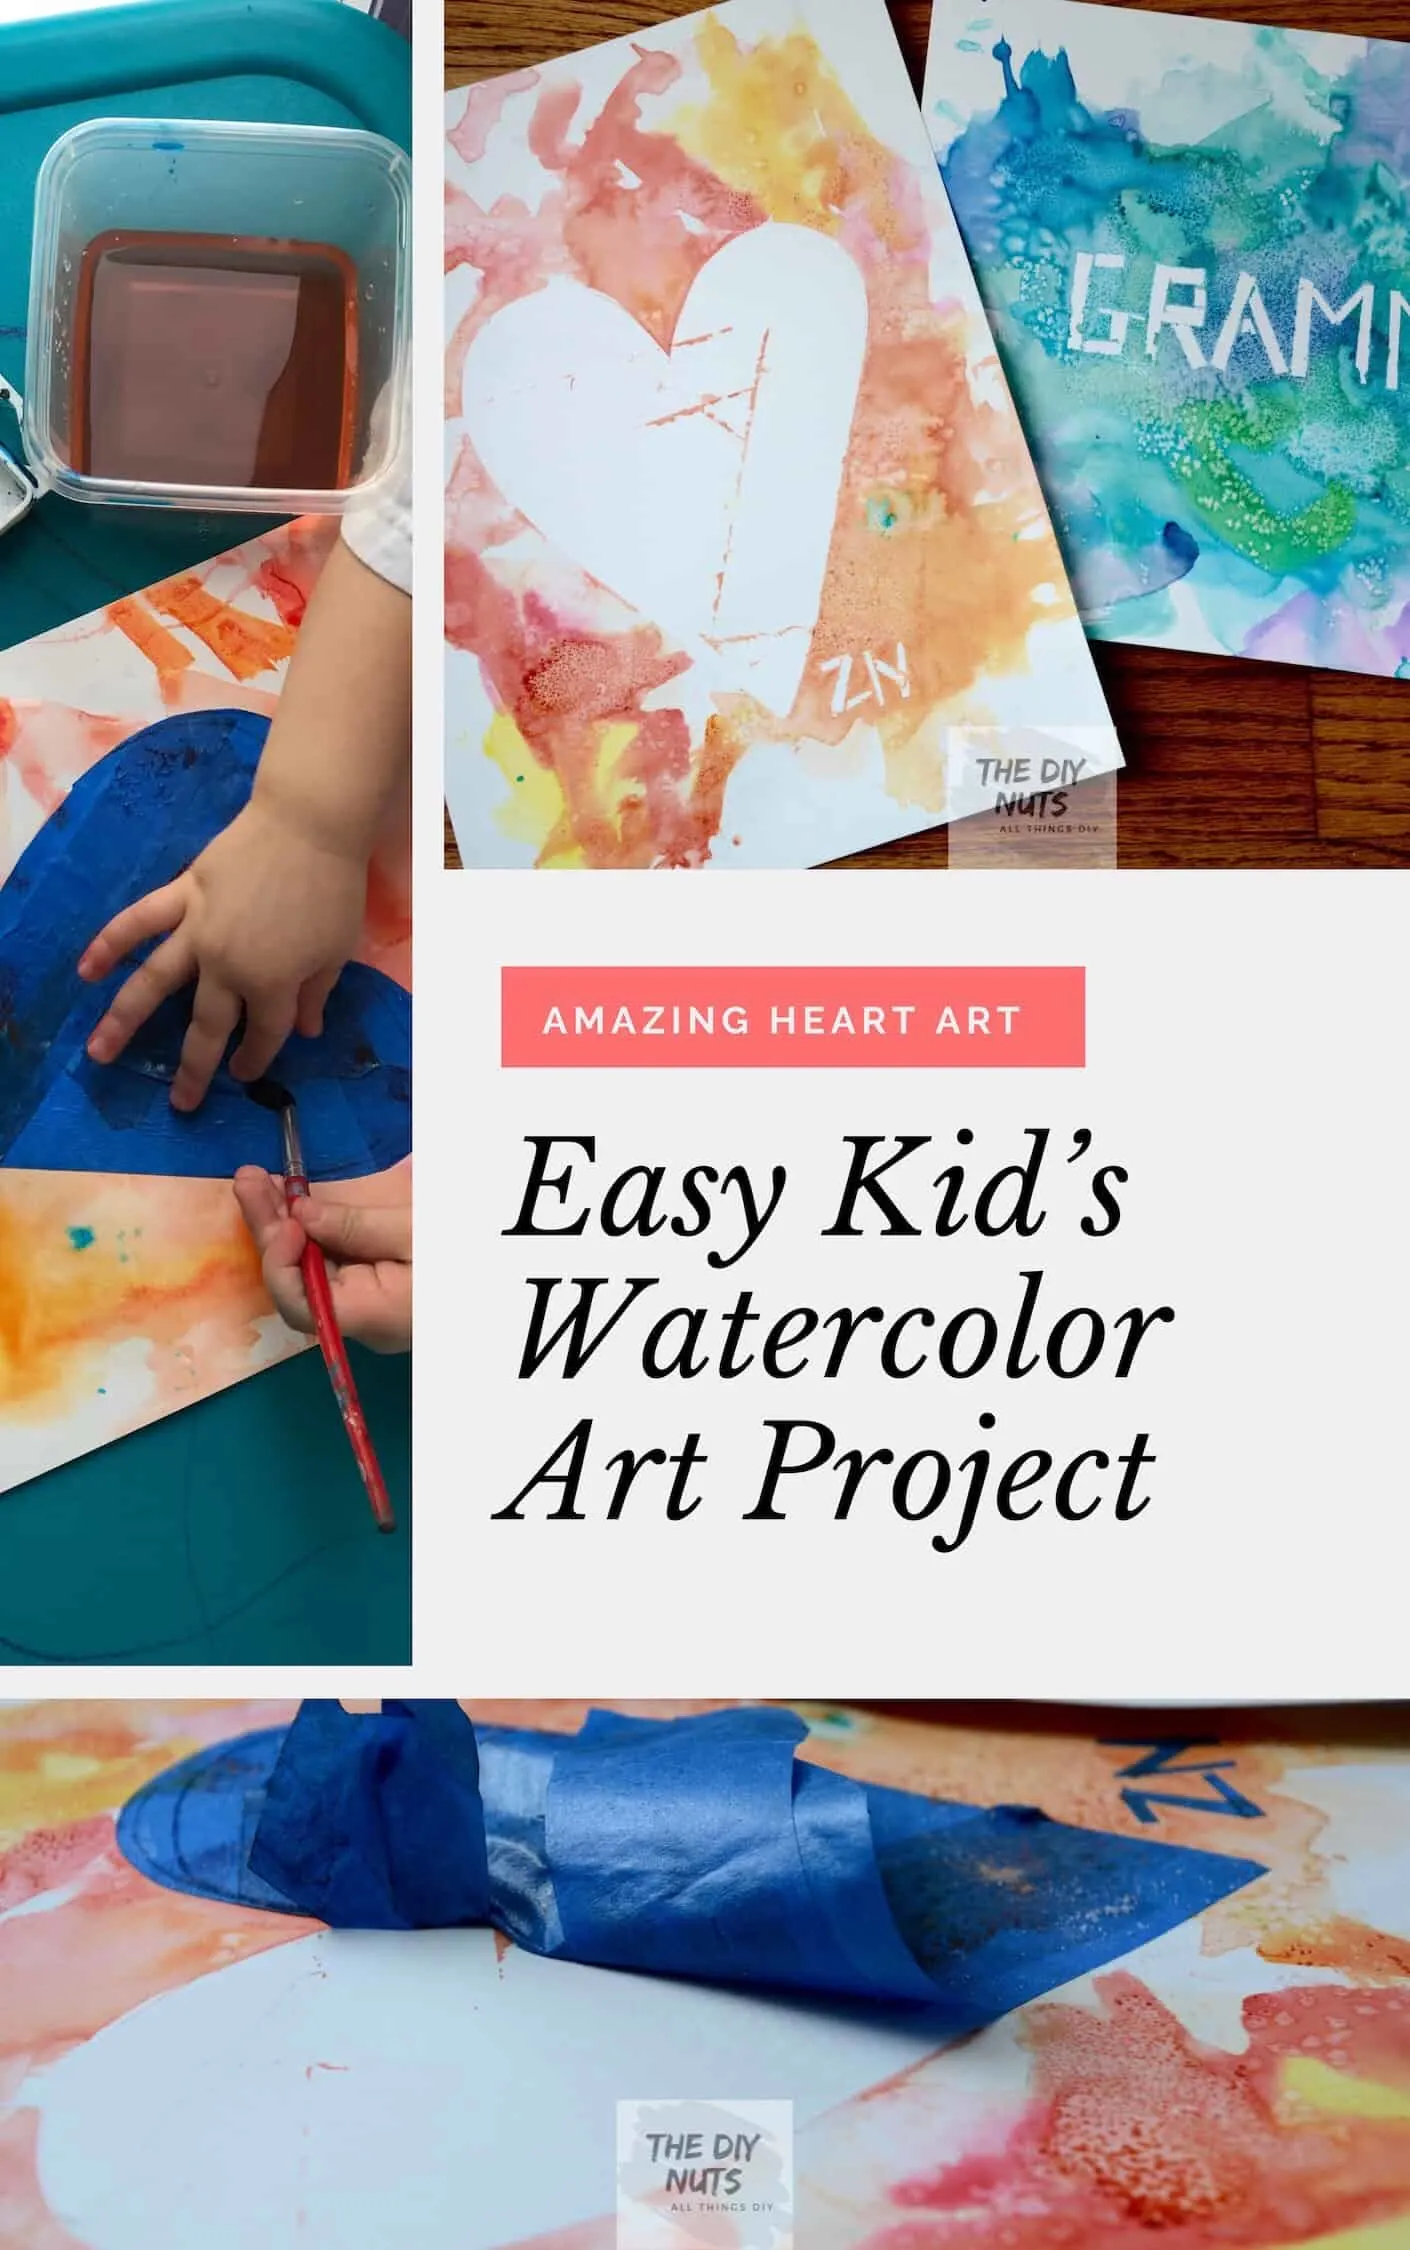 How to create an easy watercolor art project kids